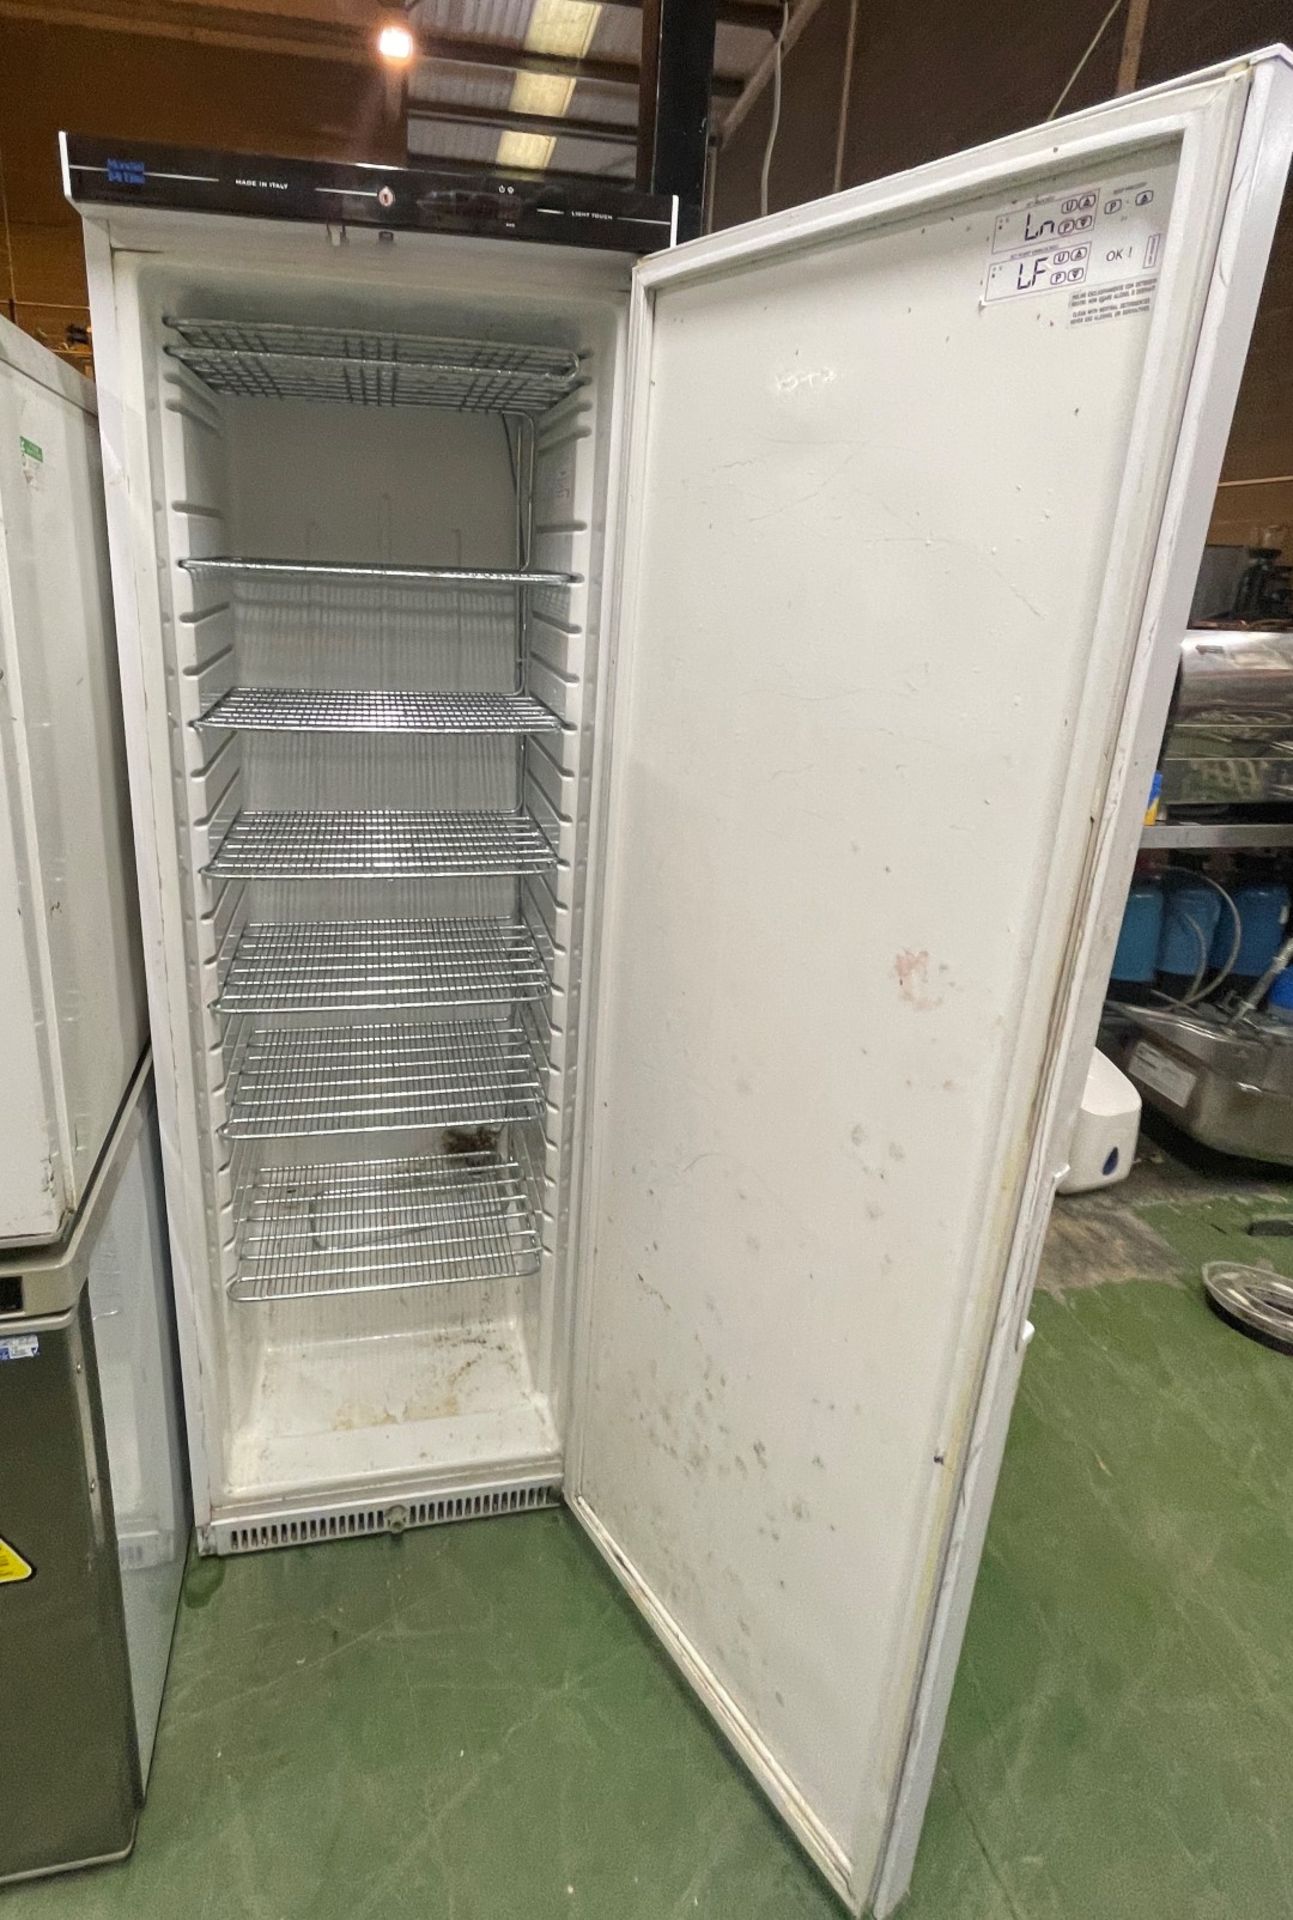 1 x Mondial Elite Single Door 580Ltr Upright Commercial Freezer With a White Exterior - Image 5 of 5